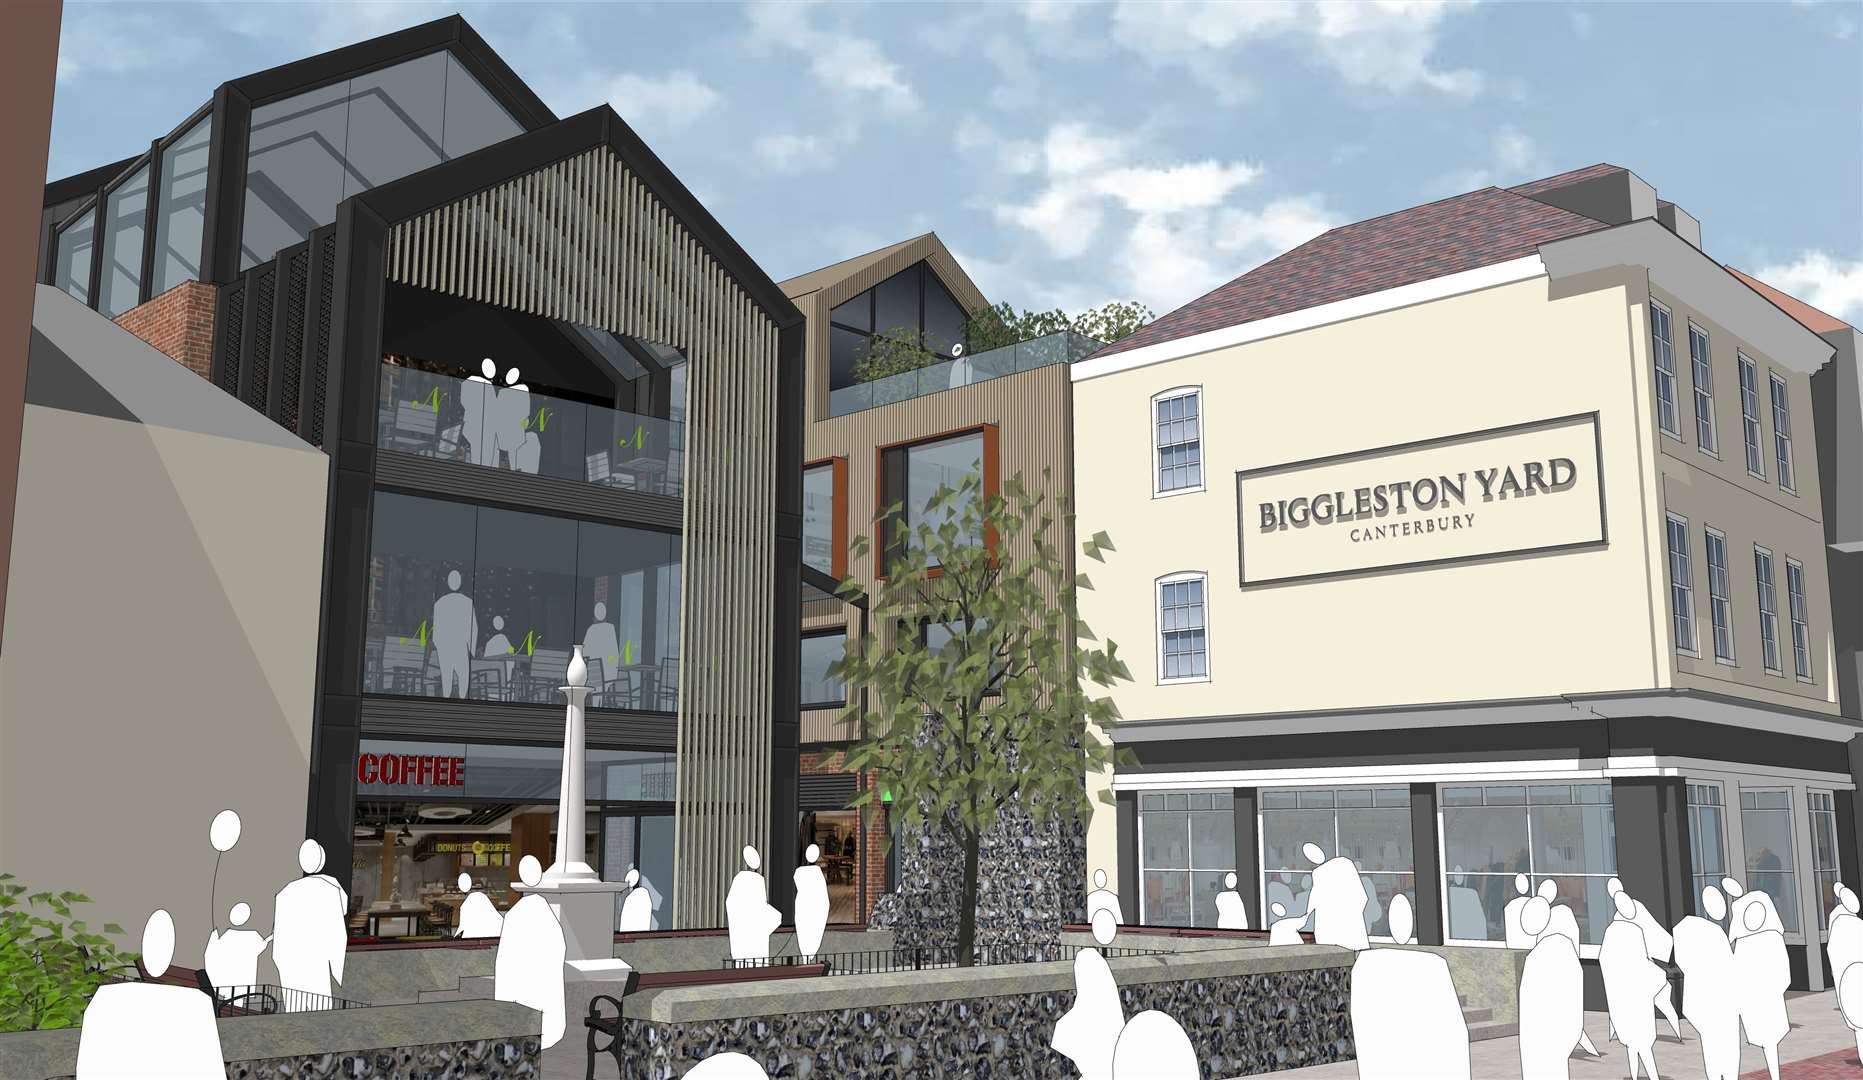 Plans are in place to renovate the current Nasons site and turn it into Biggleston Yard, an area boasting housing and shops